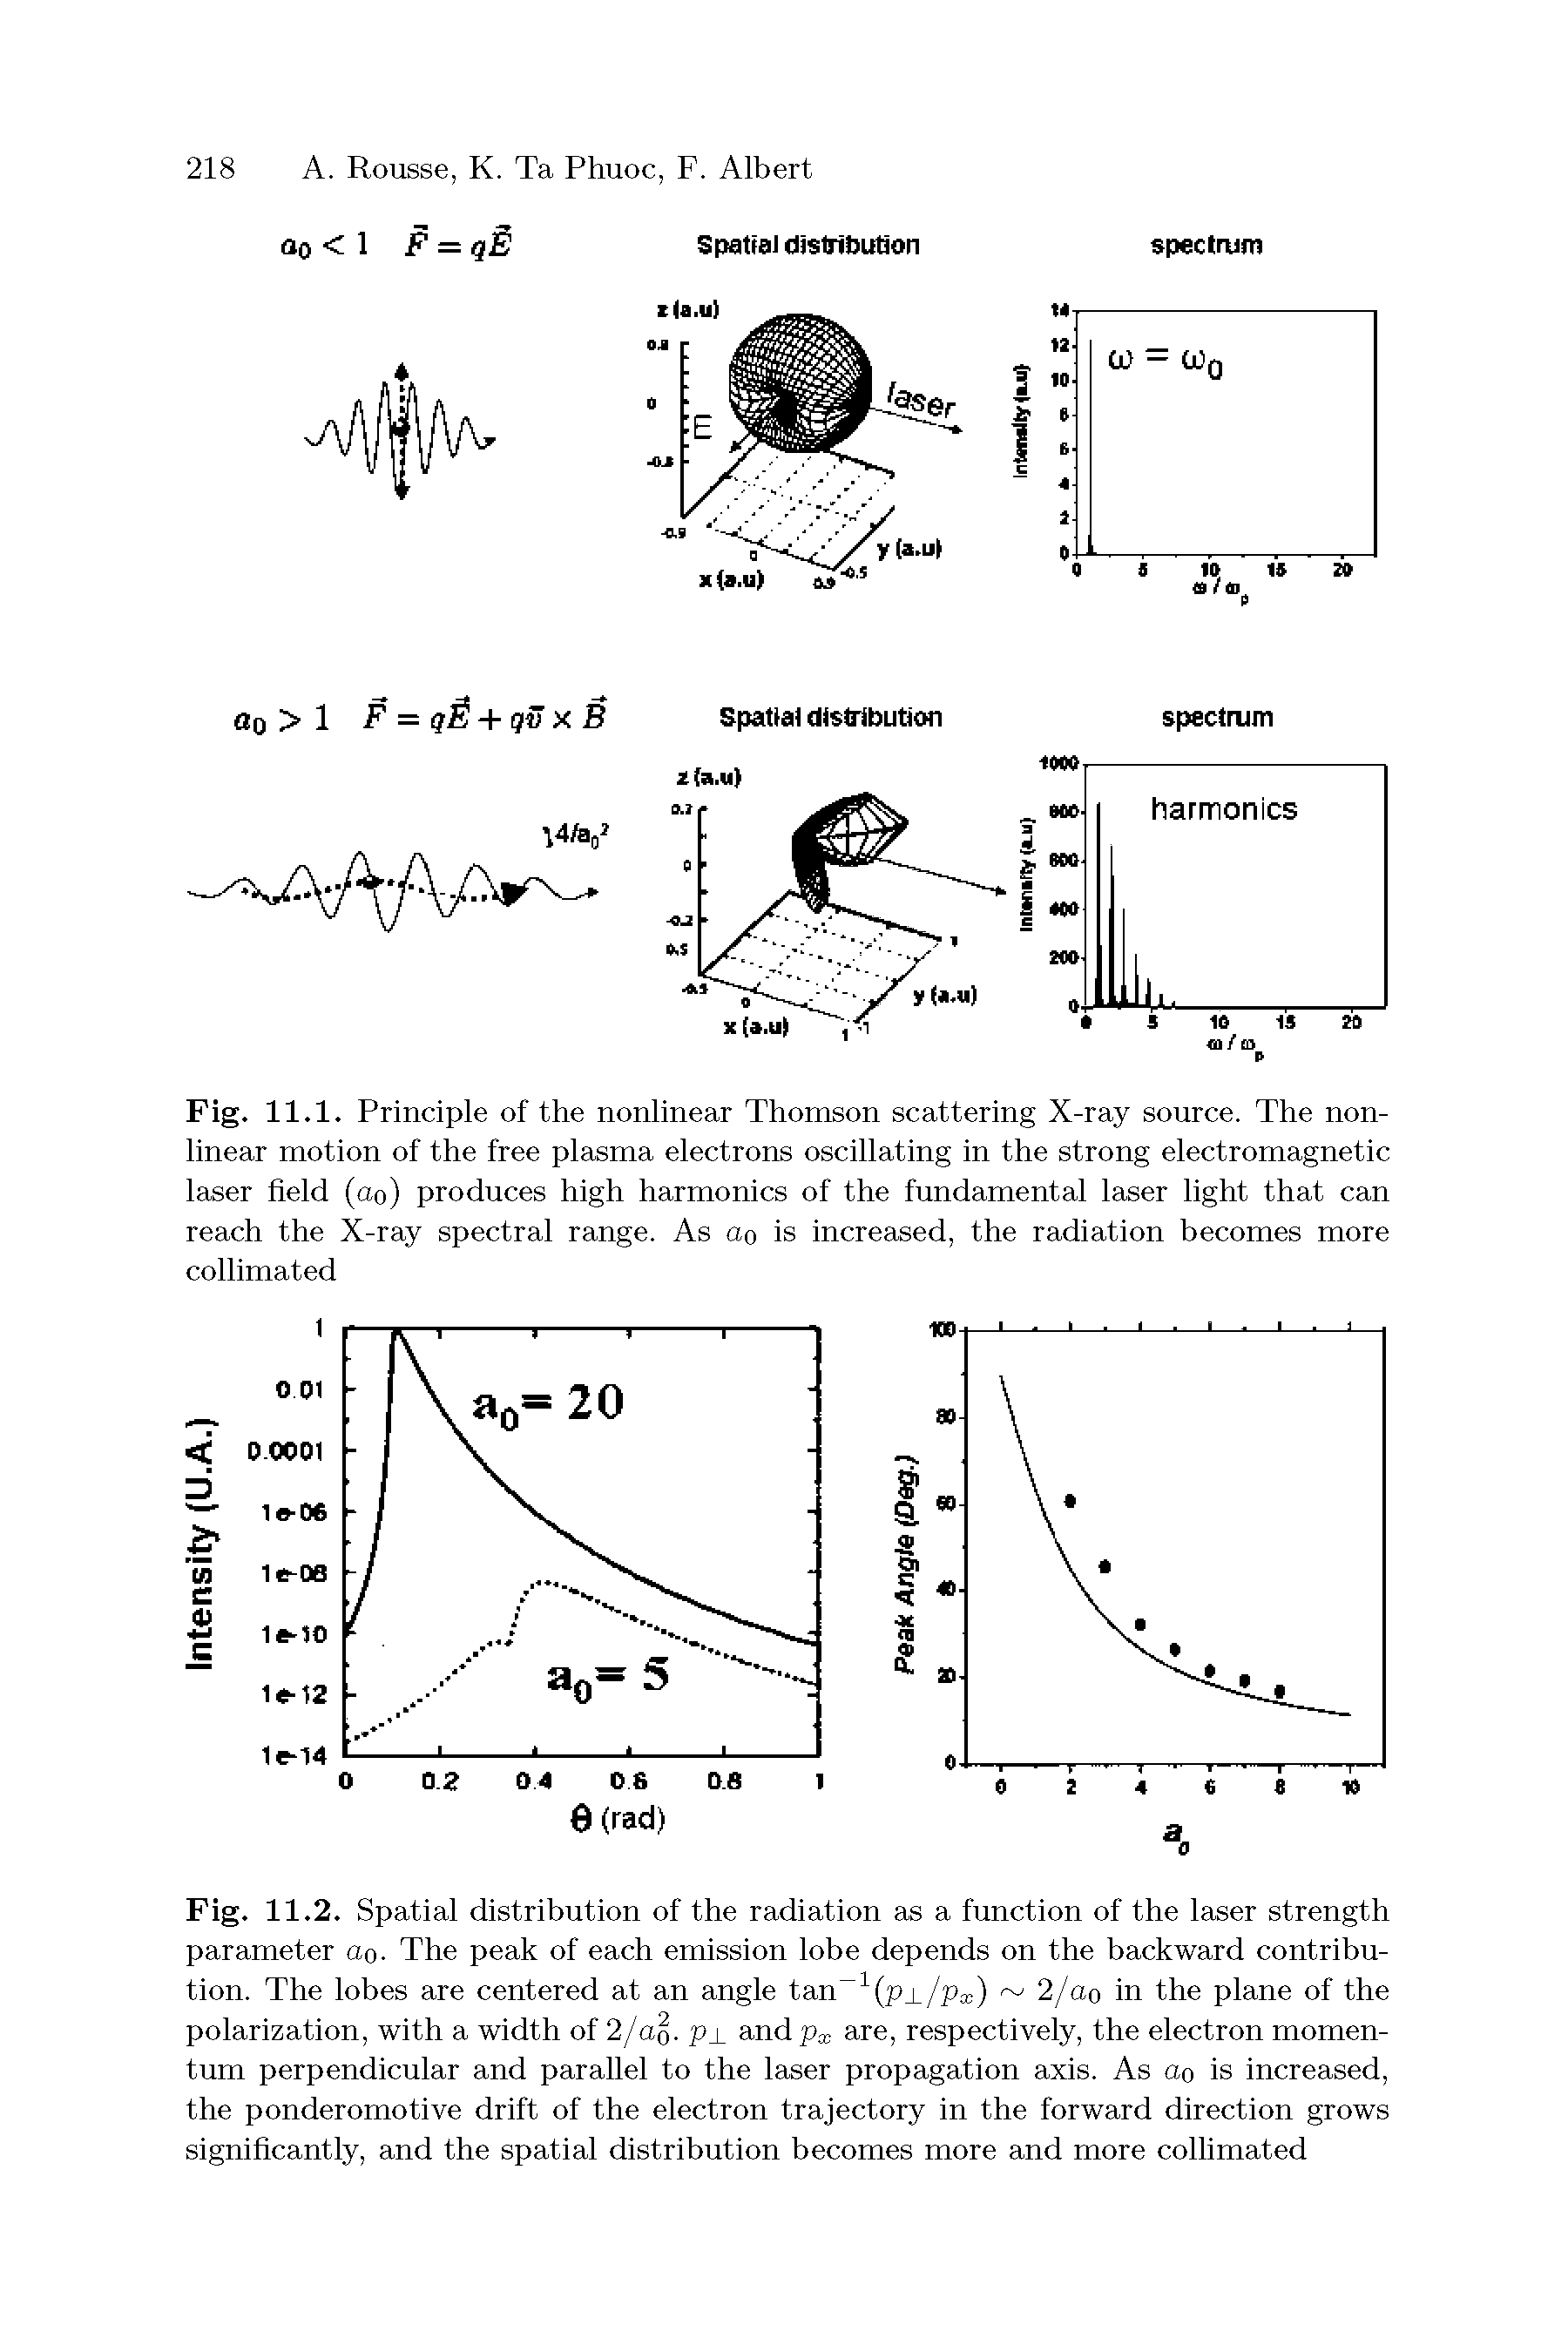 Fig. 11.1. Principle of the nonlinear Thomson scattering X-ray source. The nonlinear motion of the free plasma electrons oscillating in the strong electromagnetic laser held (ao) produces high harmonics of the fundamental laser light that can reach the X-ray spectral range. As ao is increased, the radiation becomes more collimated...